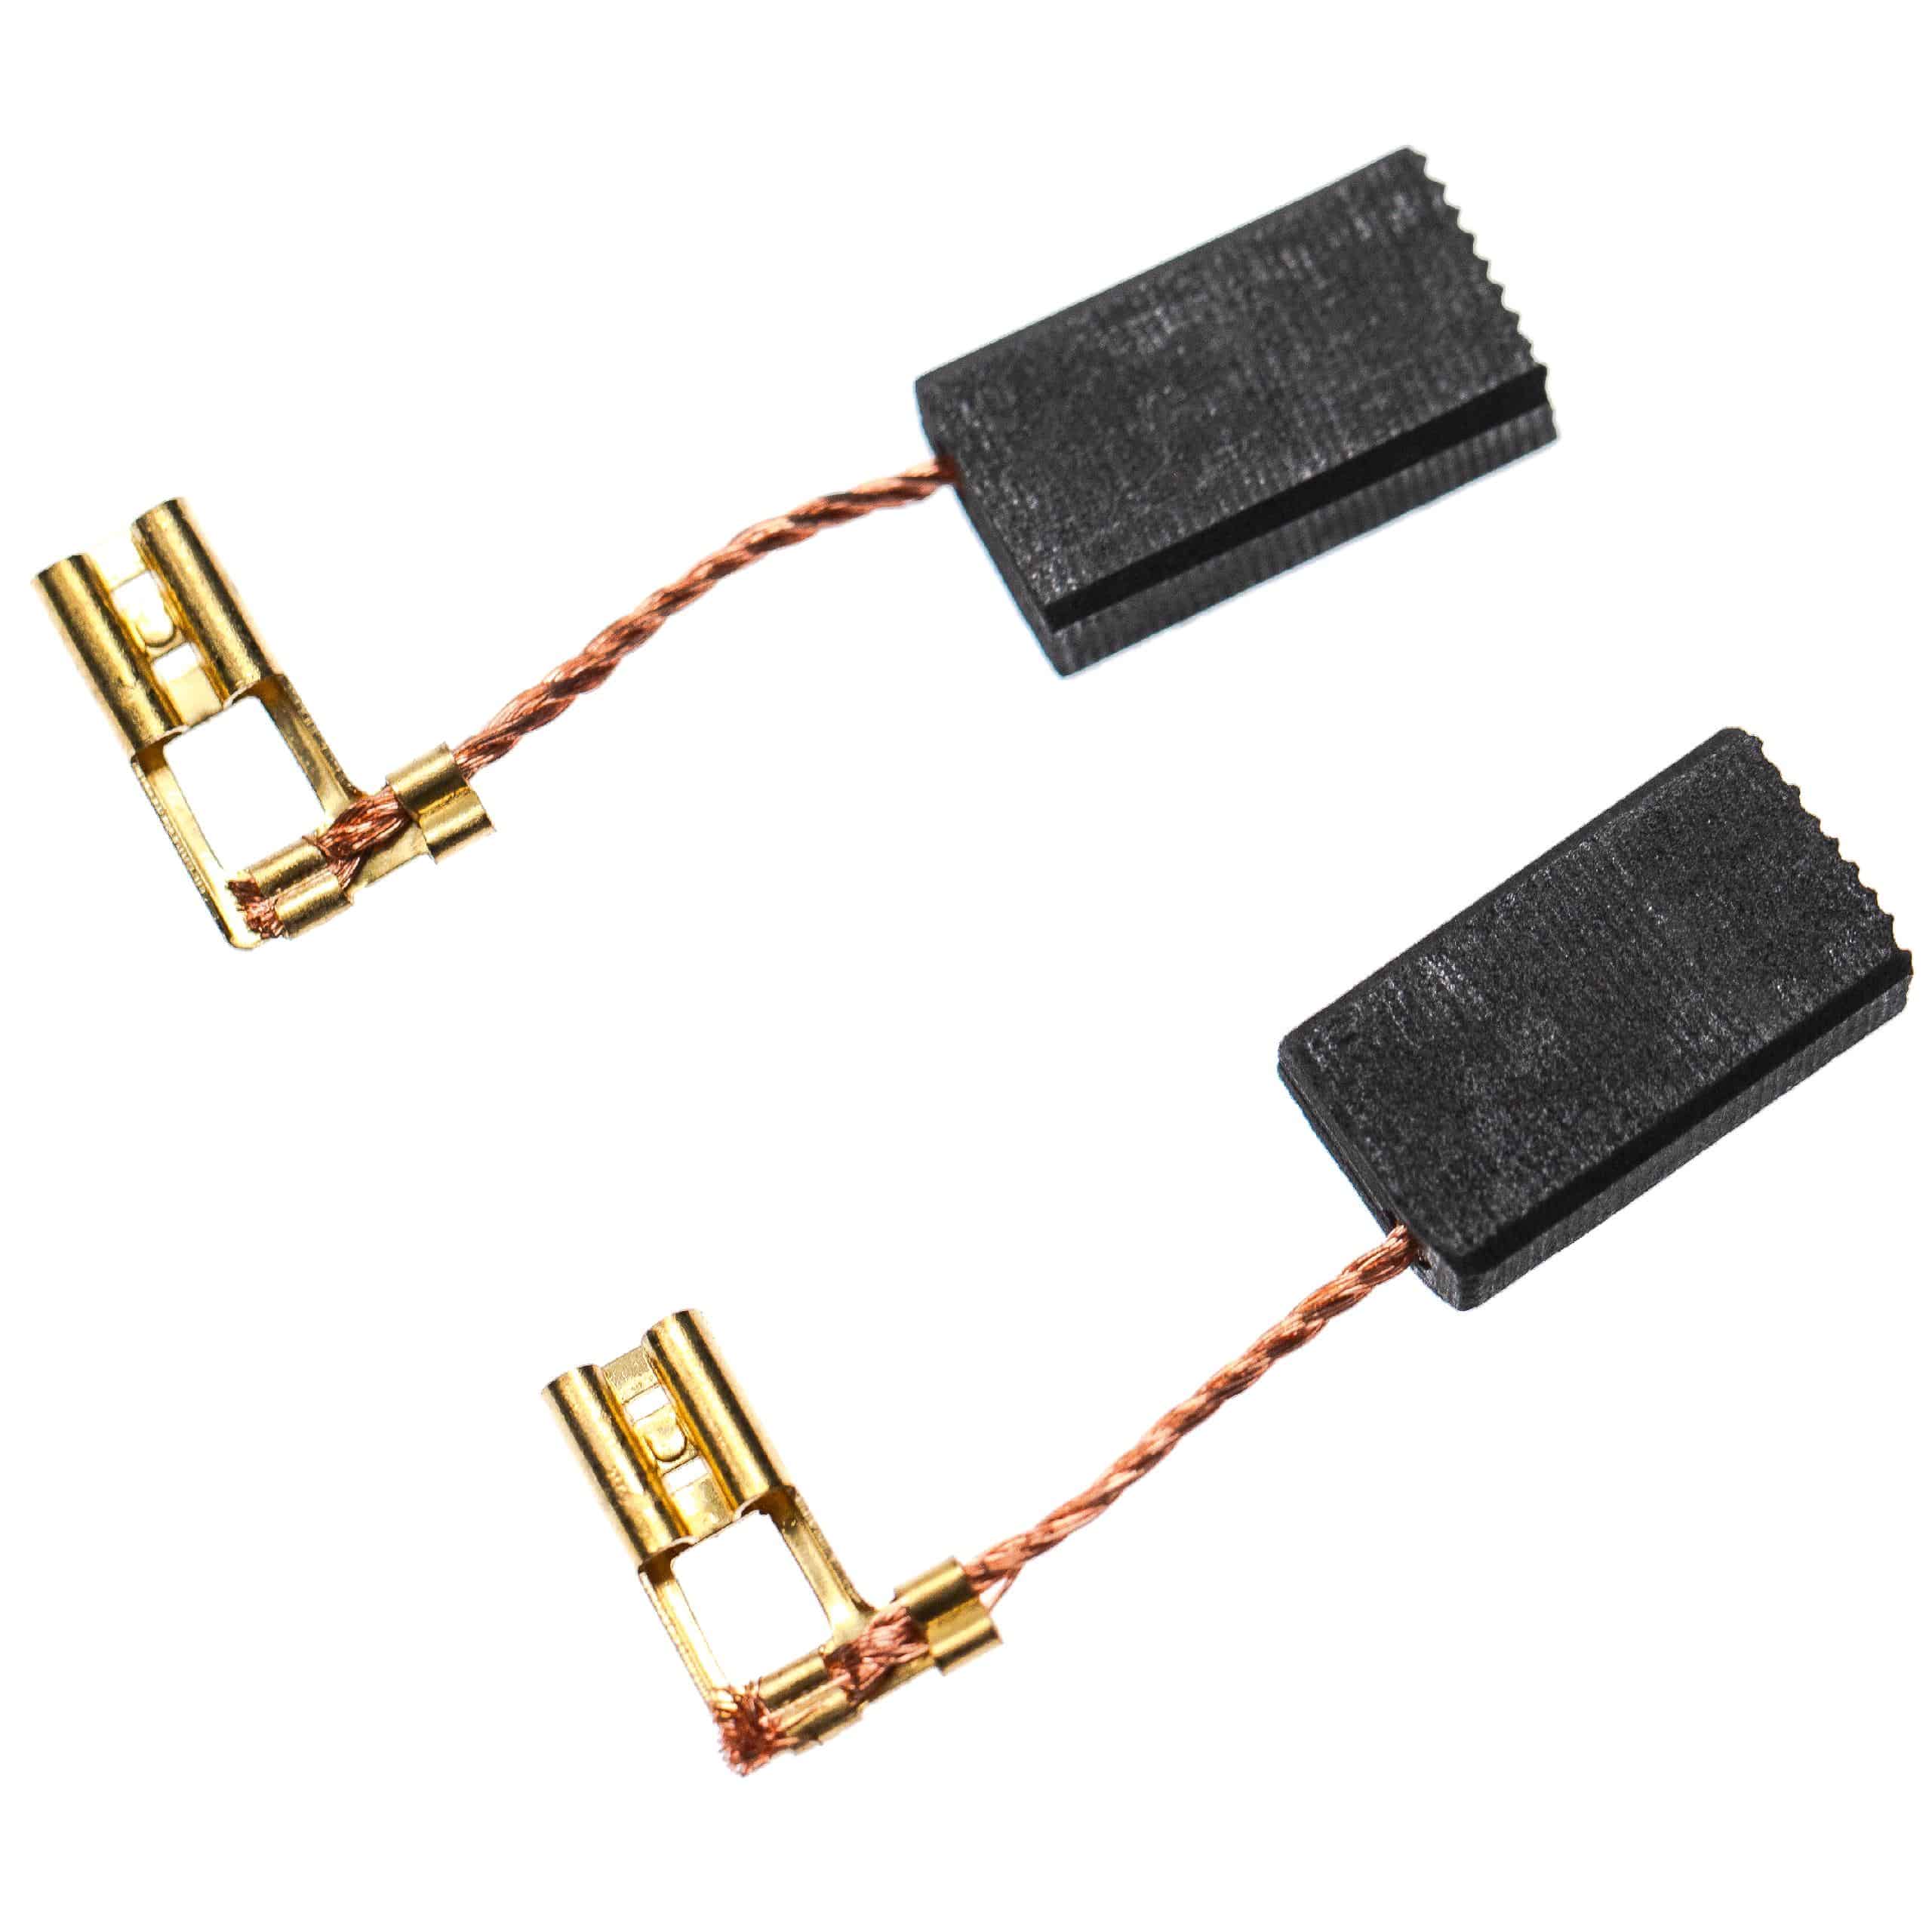 2x Carbon Brush 5 x 10 x 18 mm for power tool